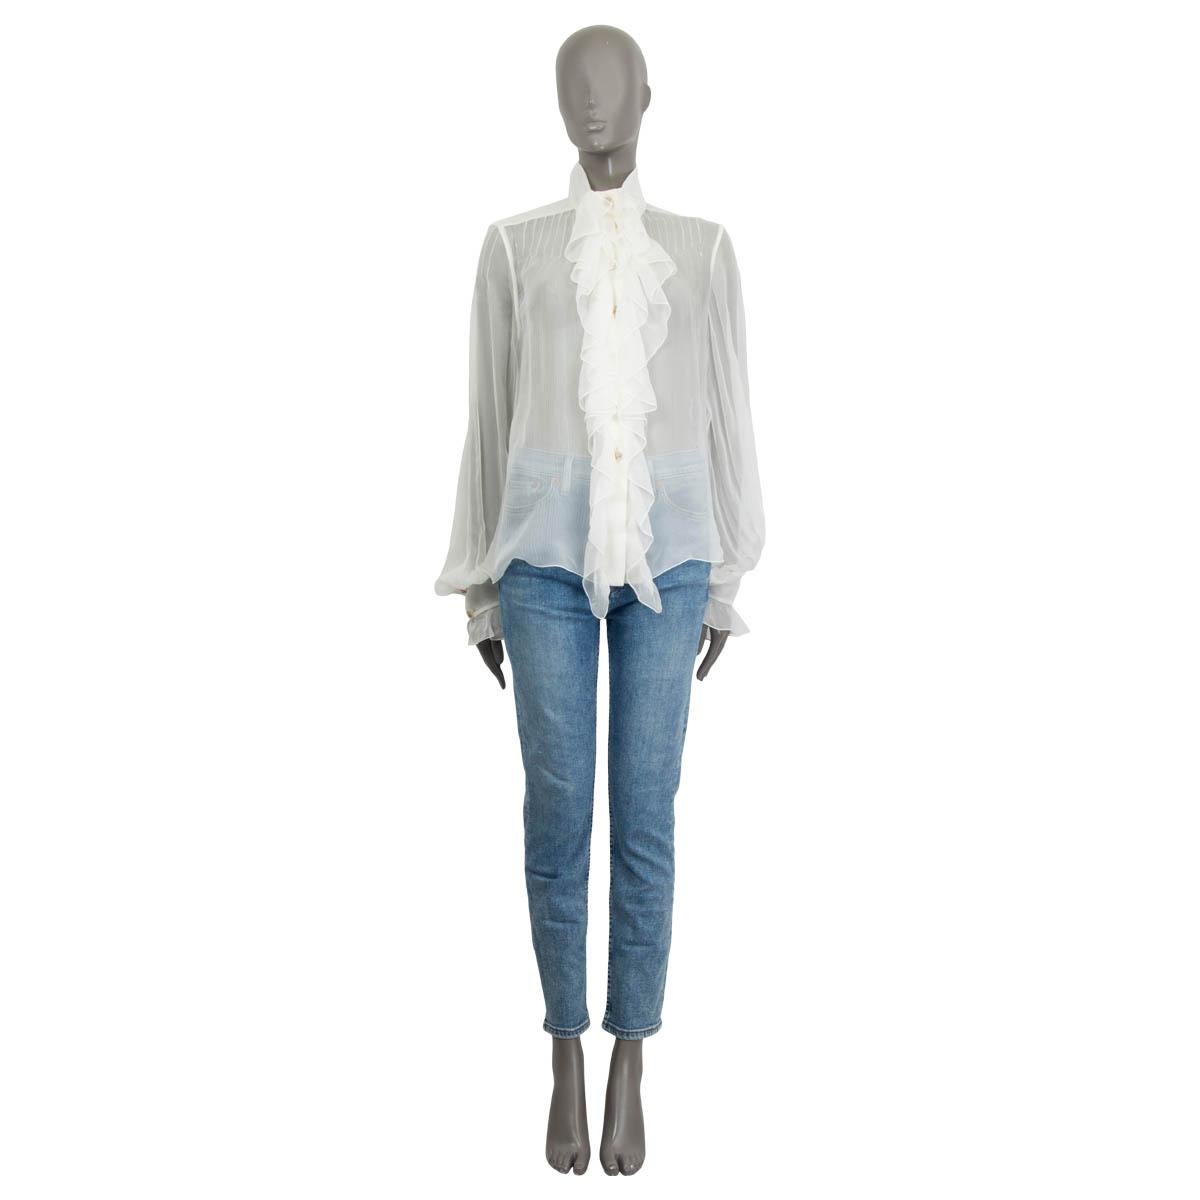 100% authentic Chanel 2019 sheer blouse in ivory silk (100%) with ruched detail at front that opens with seven lion head buttons in mother-of-pearl. Features a high collar and ruched cuffs that close with two buttons. Has been worn once and is in